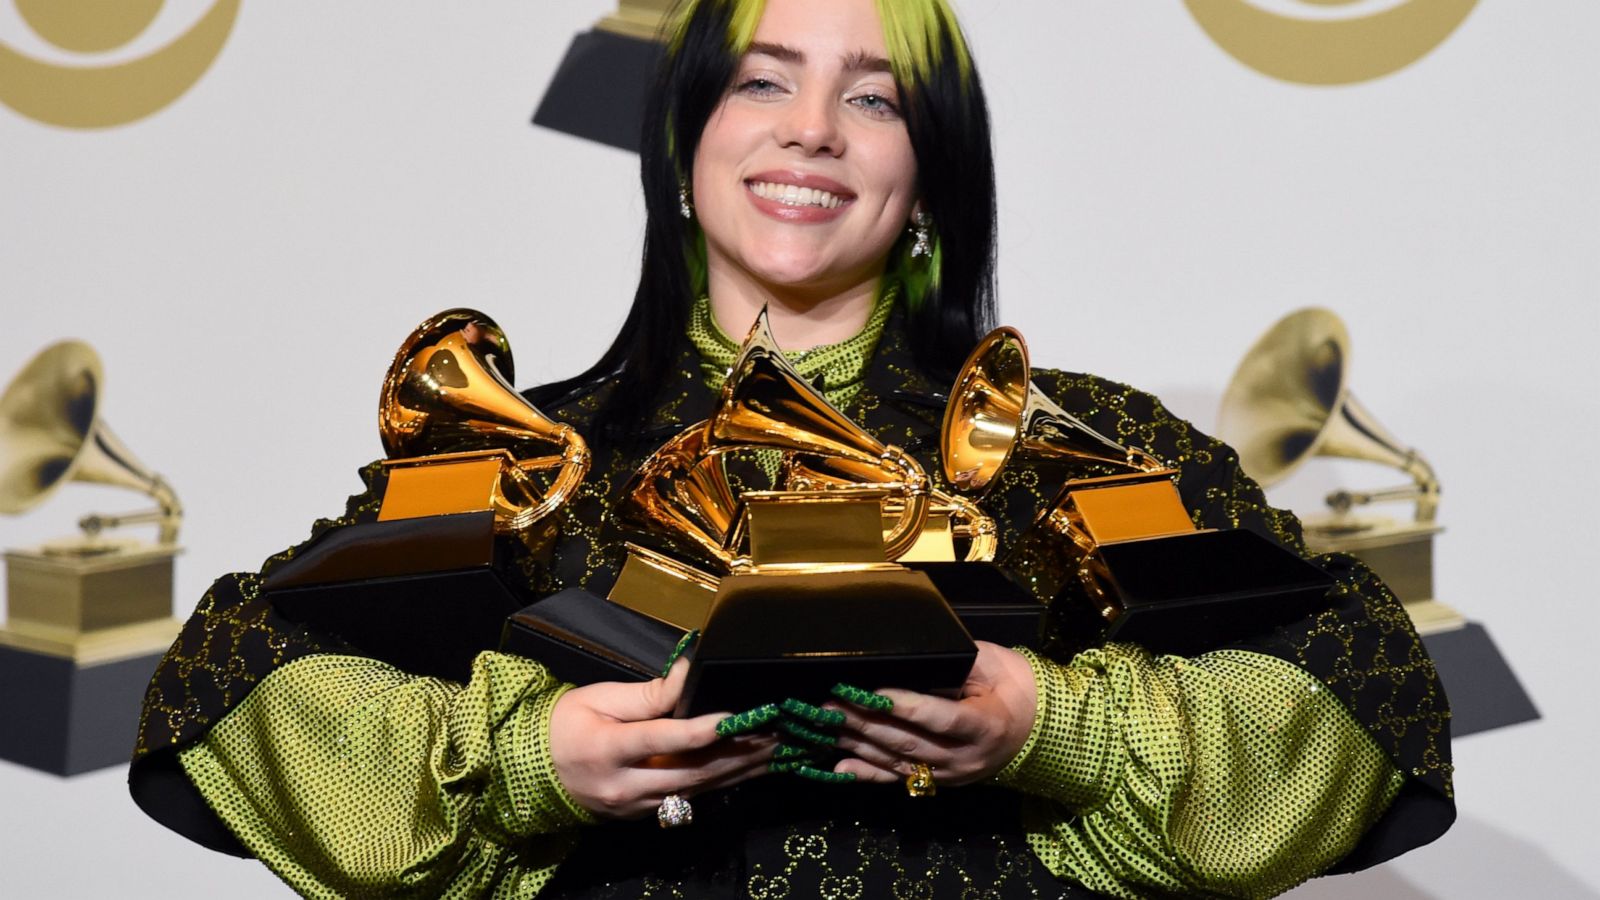 Billie Eilish, a voice of the youth, tops the Grammy Awards